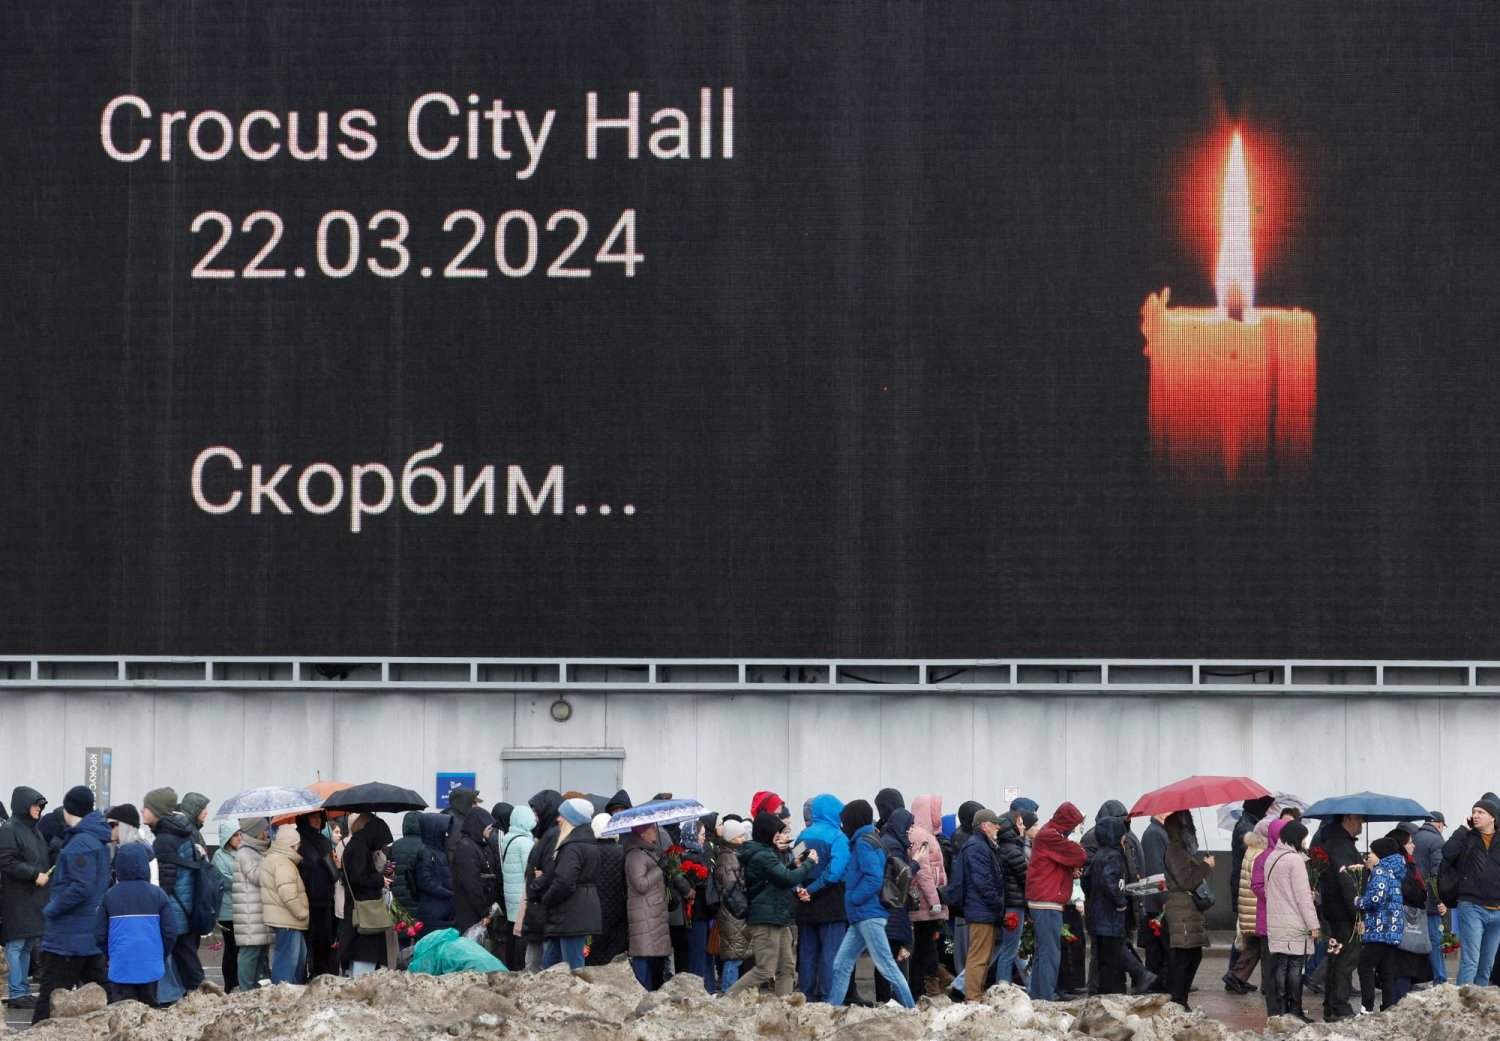 People line up to lay flowers at a makeshift memorial to the victims of a shooting attack set up outside the Crocus City Hall concert venue in the Moscow Region, Russia, March 24, 2024. REUTERS/Maxim Shemetov/File Photo